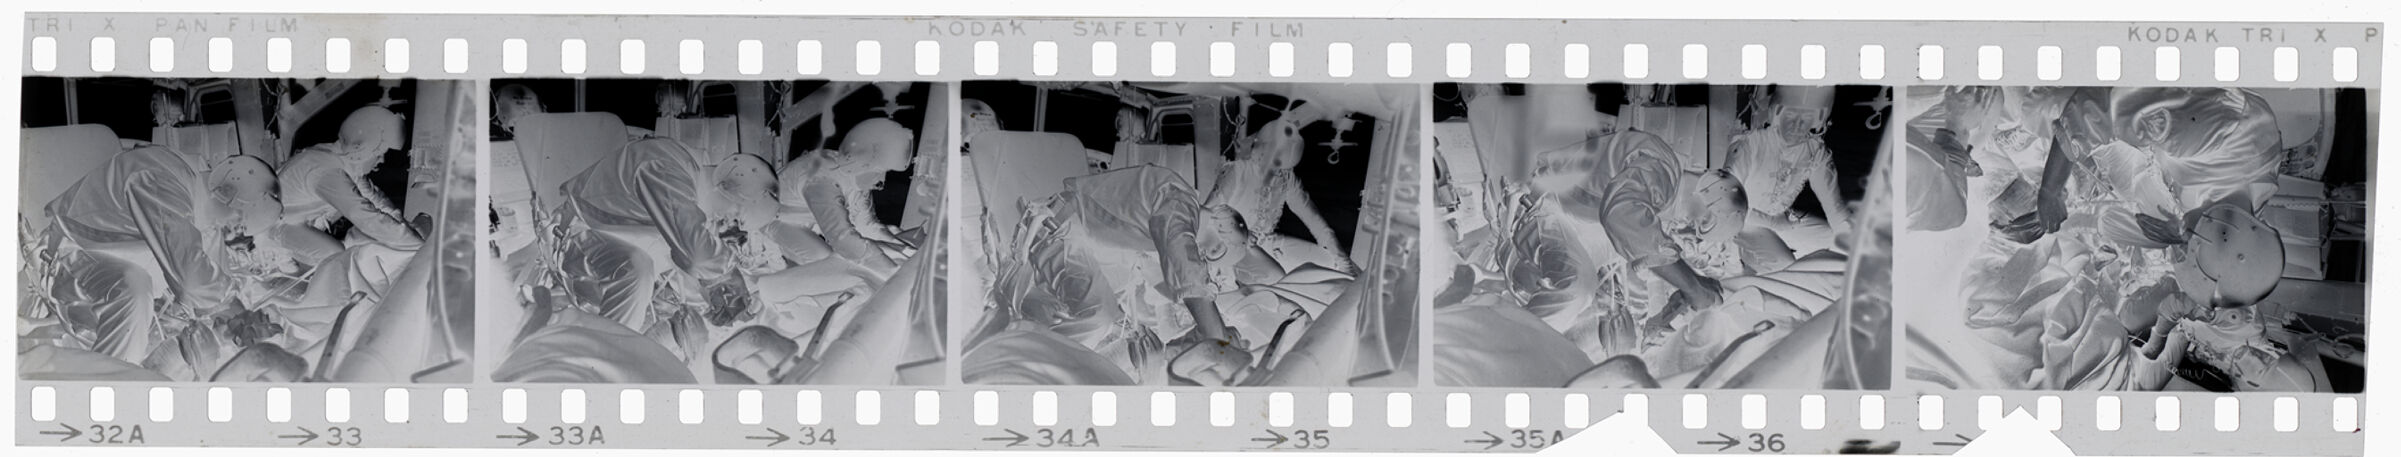 Untitled (Members Of 57Th Medical Detachment Treat Wounded Soldiers Inside Medevac Helicopter, Vietnam)